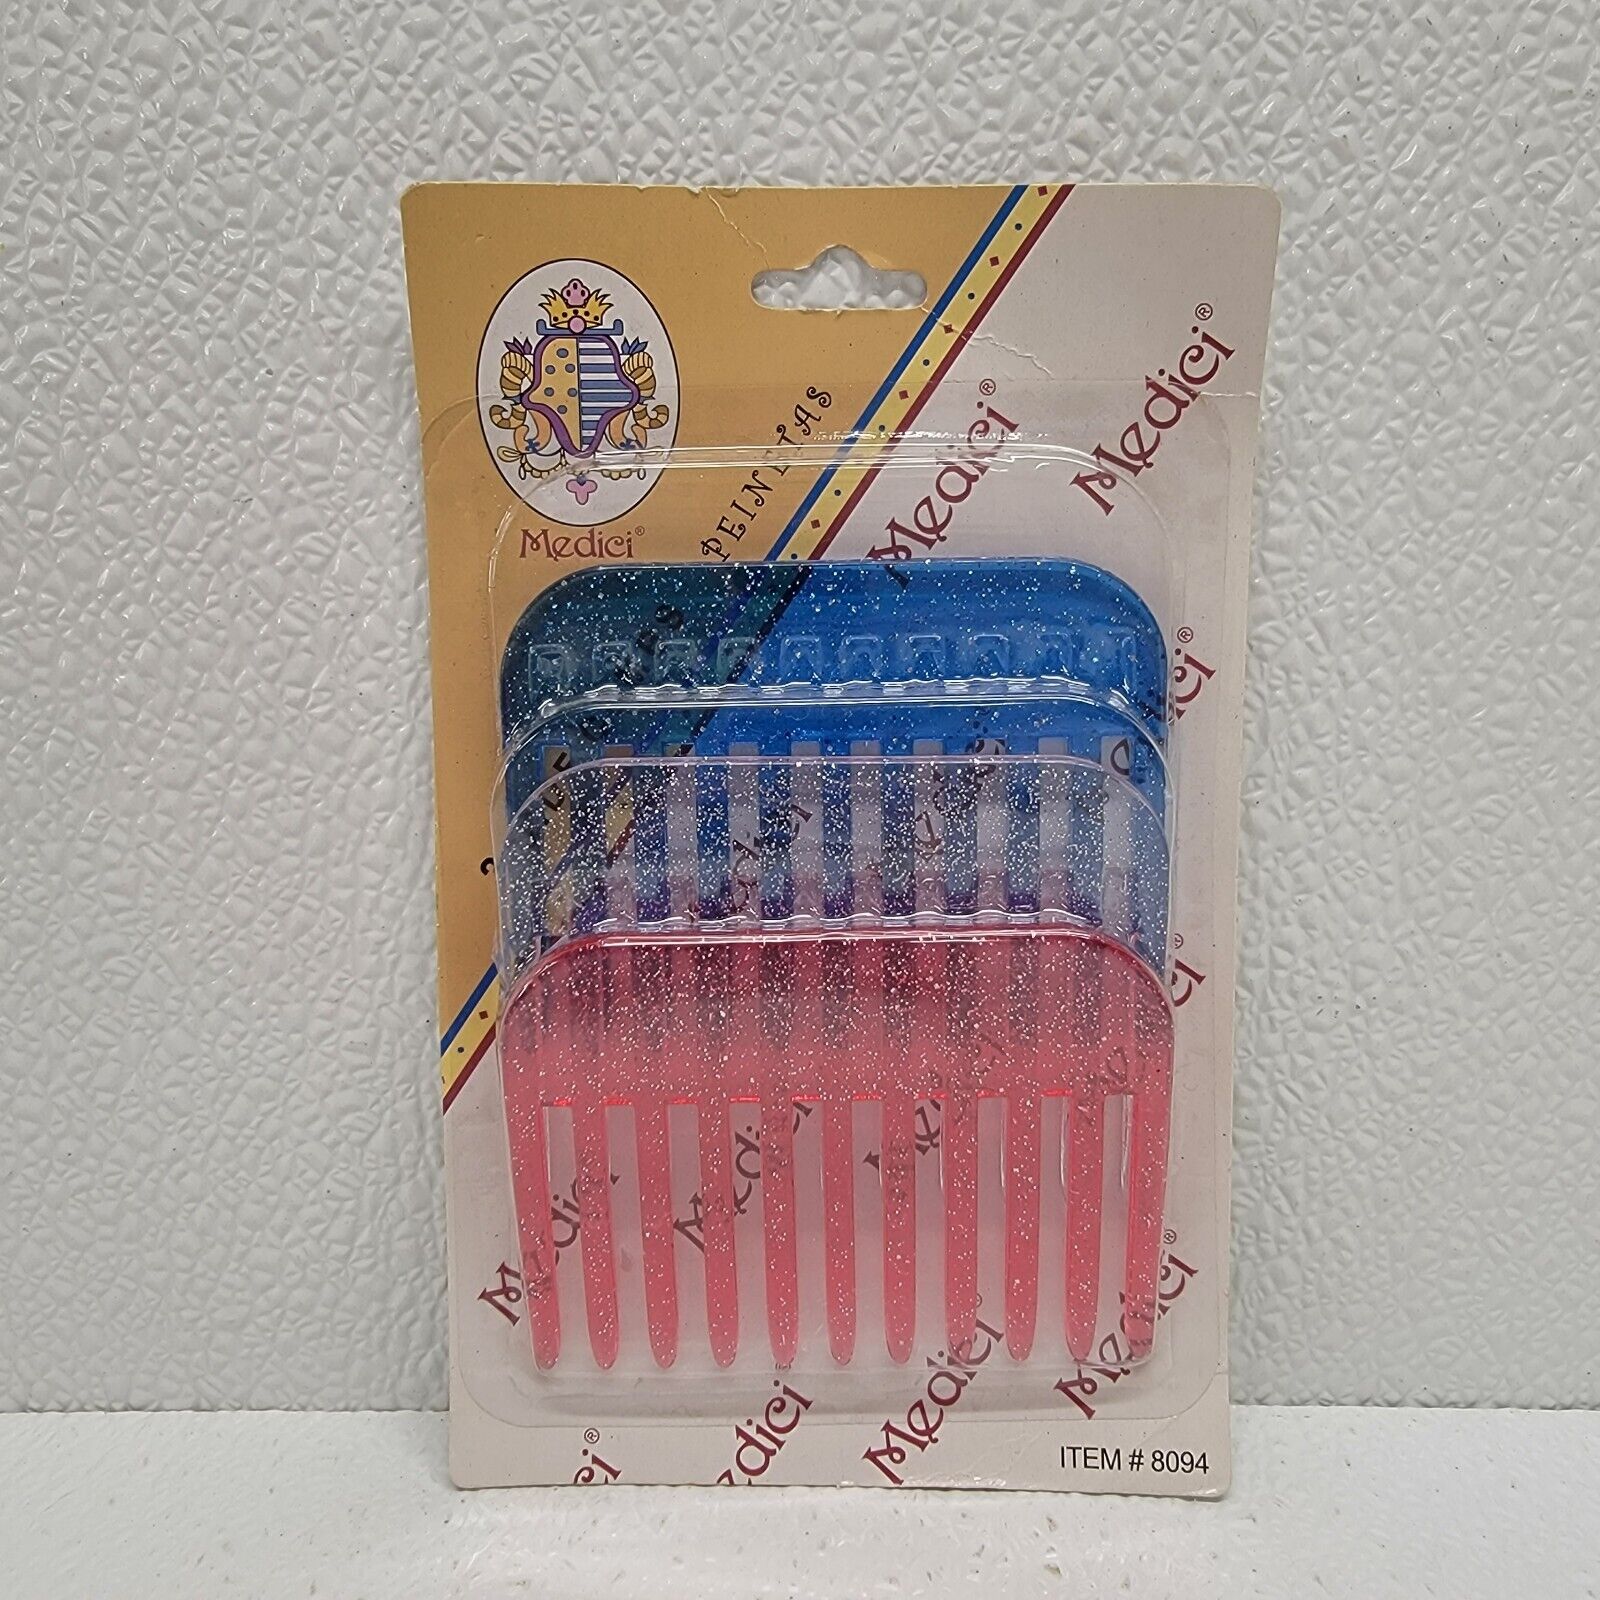 Vintage Royal Items Inc. Medici Wide Combs Sparkle Glitter Pink Blue Clear